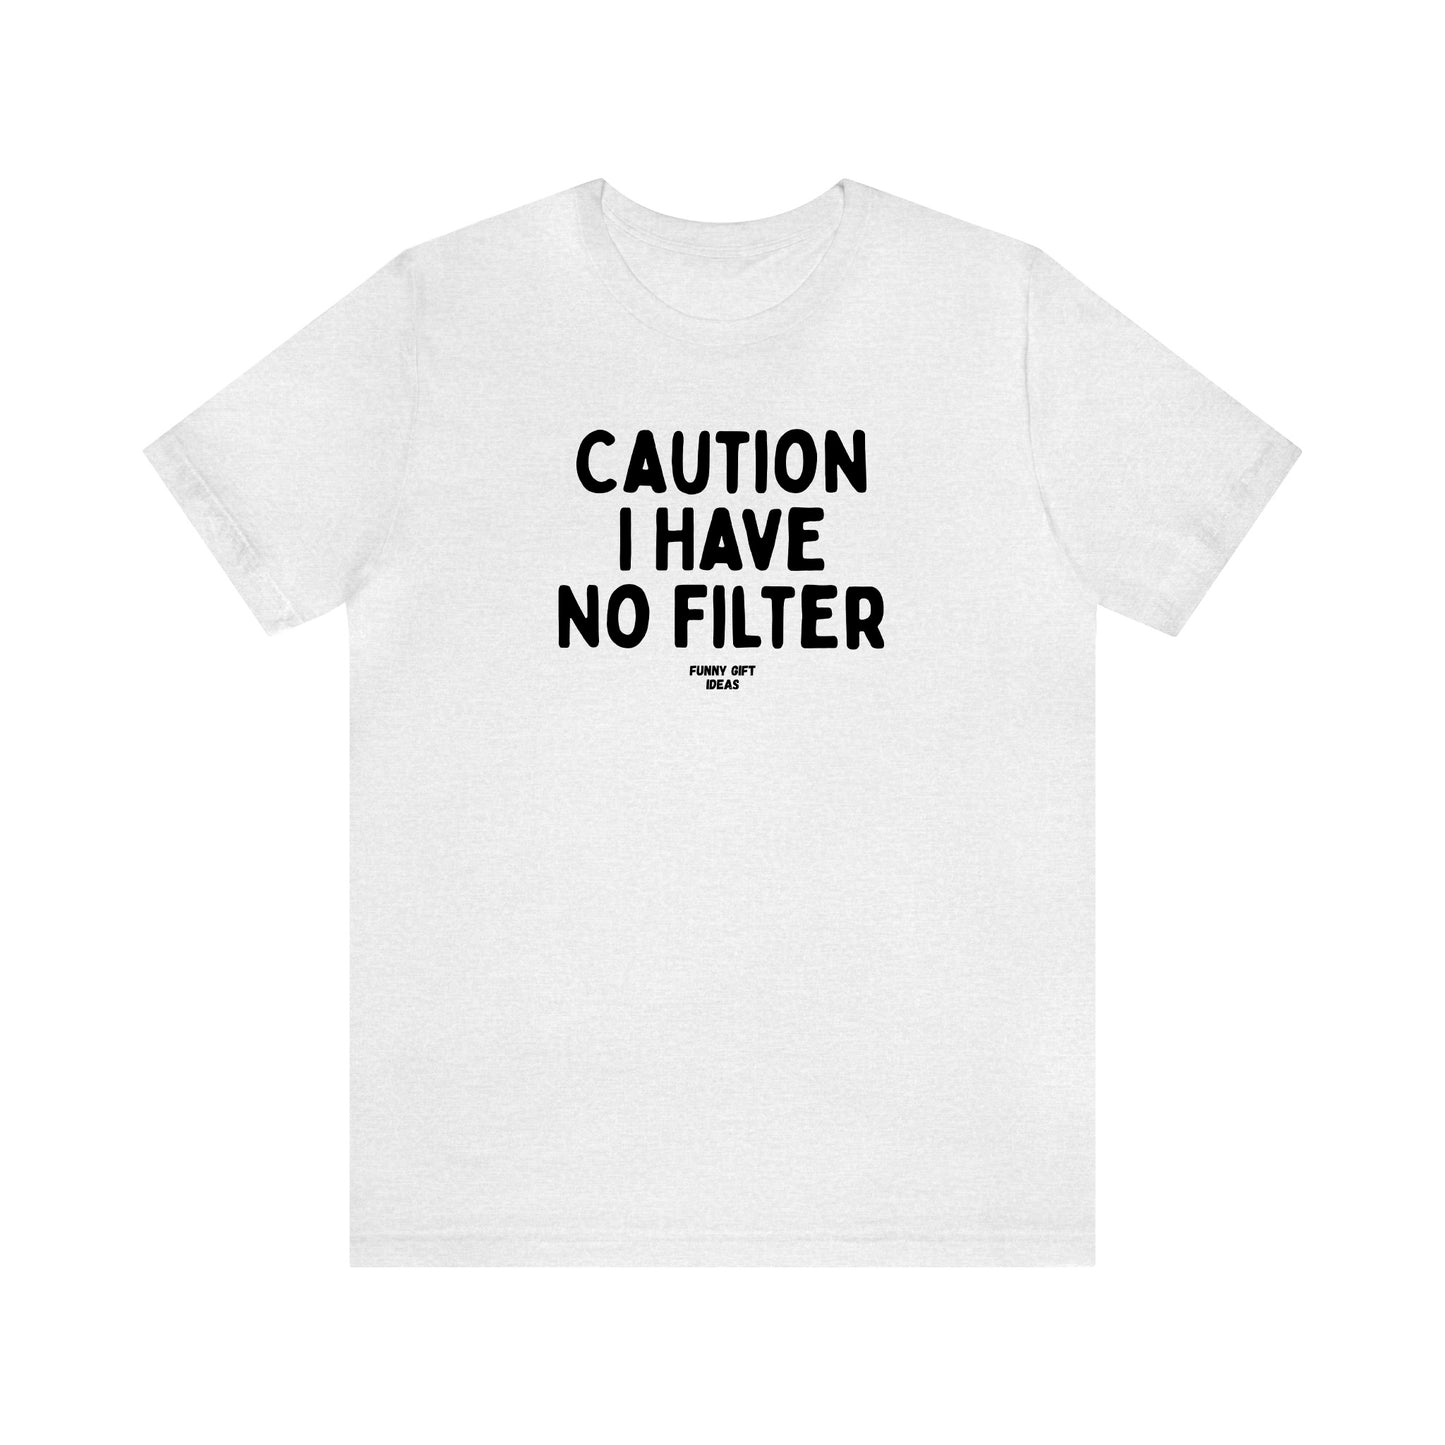 Funny Shirts for Women - Caution I Have No Filter - Women's T Shirts